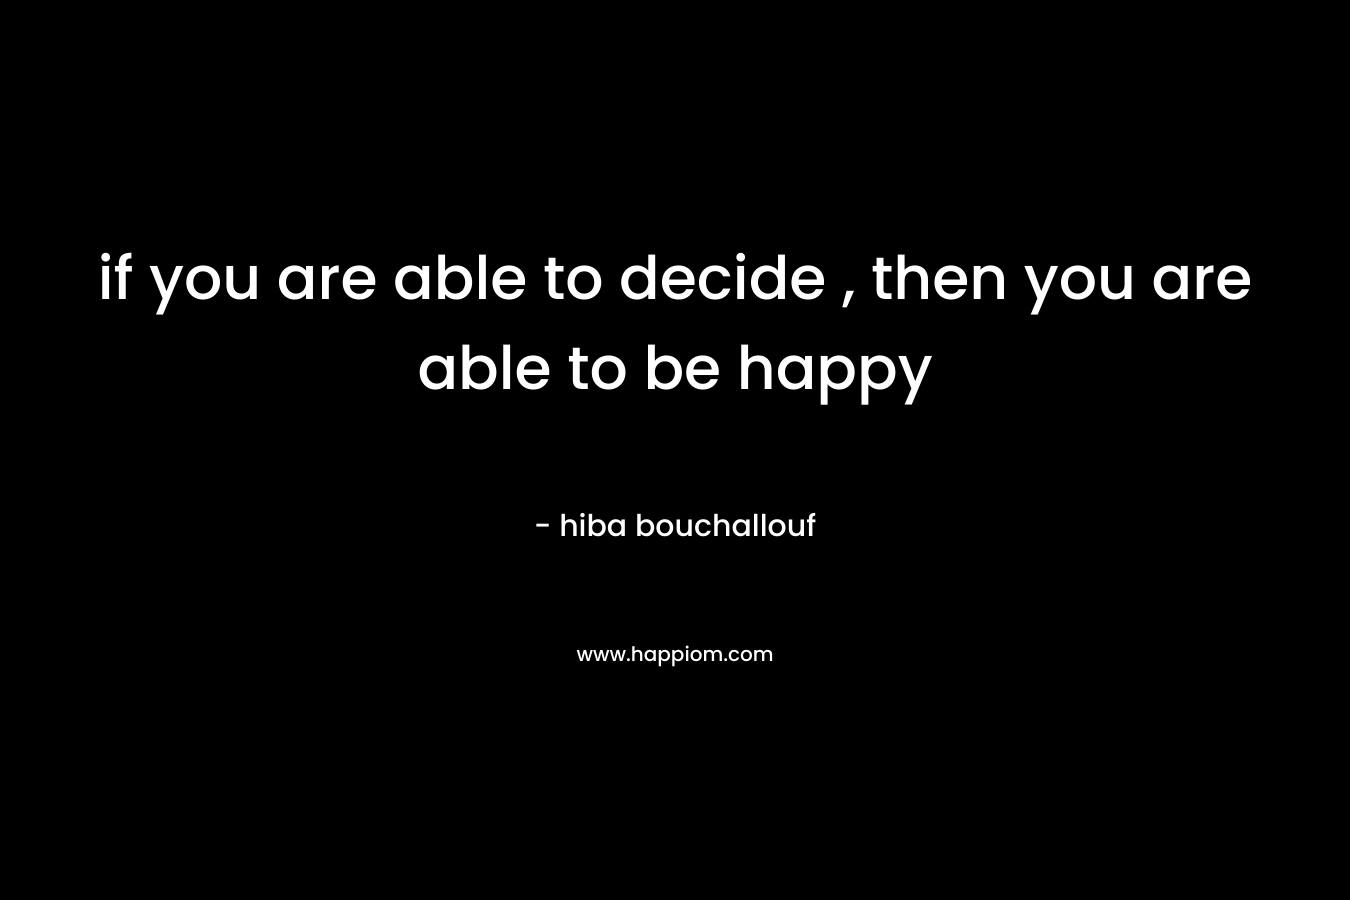 if you are able to decide , then you are able to be happy